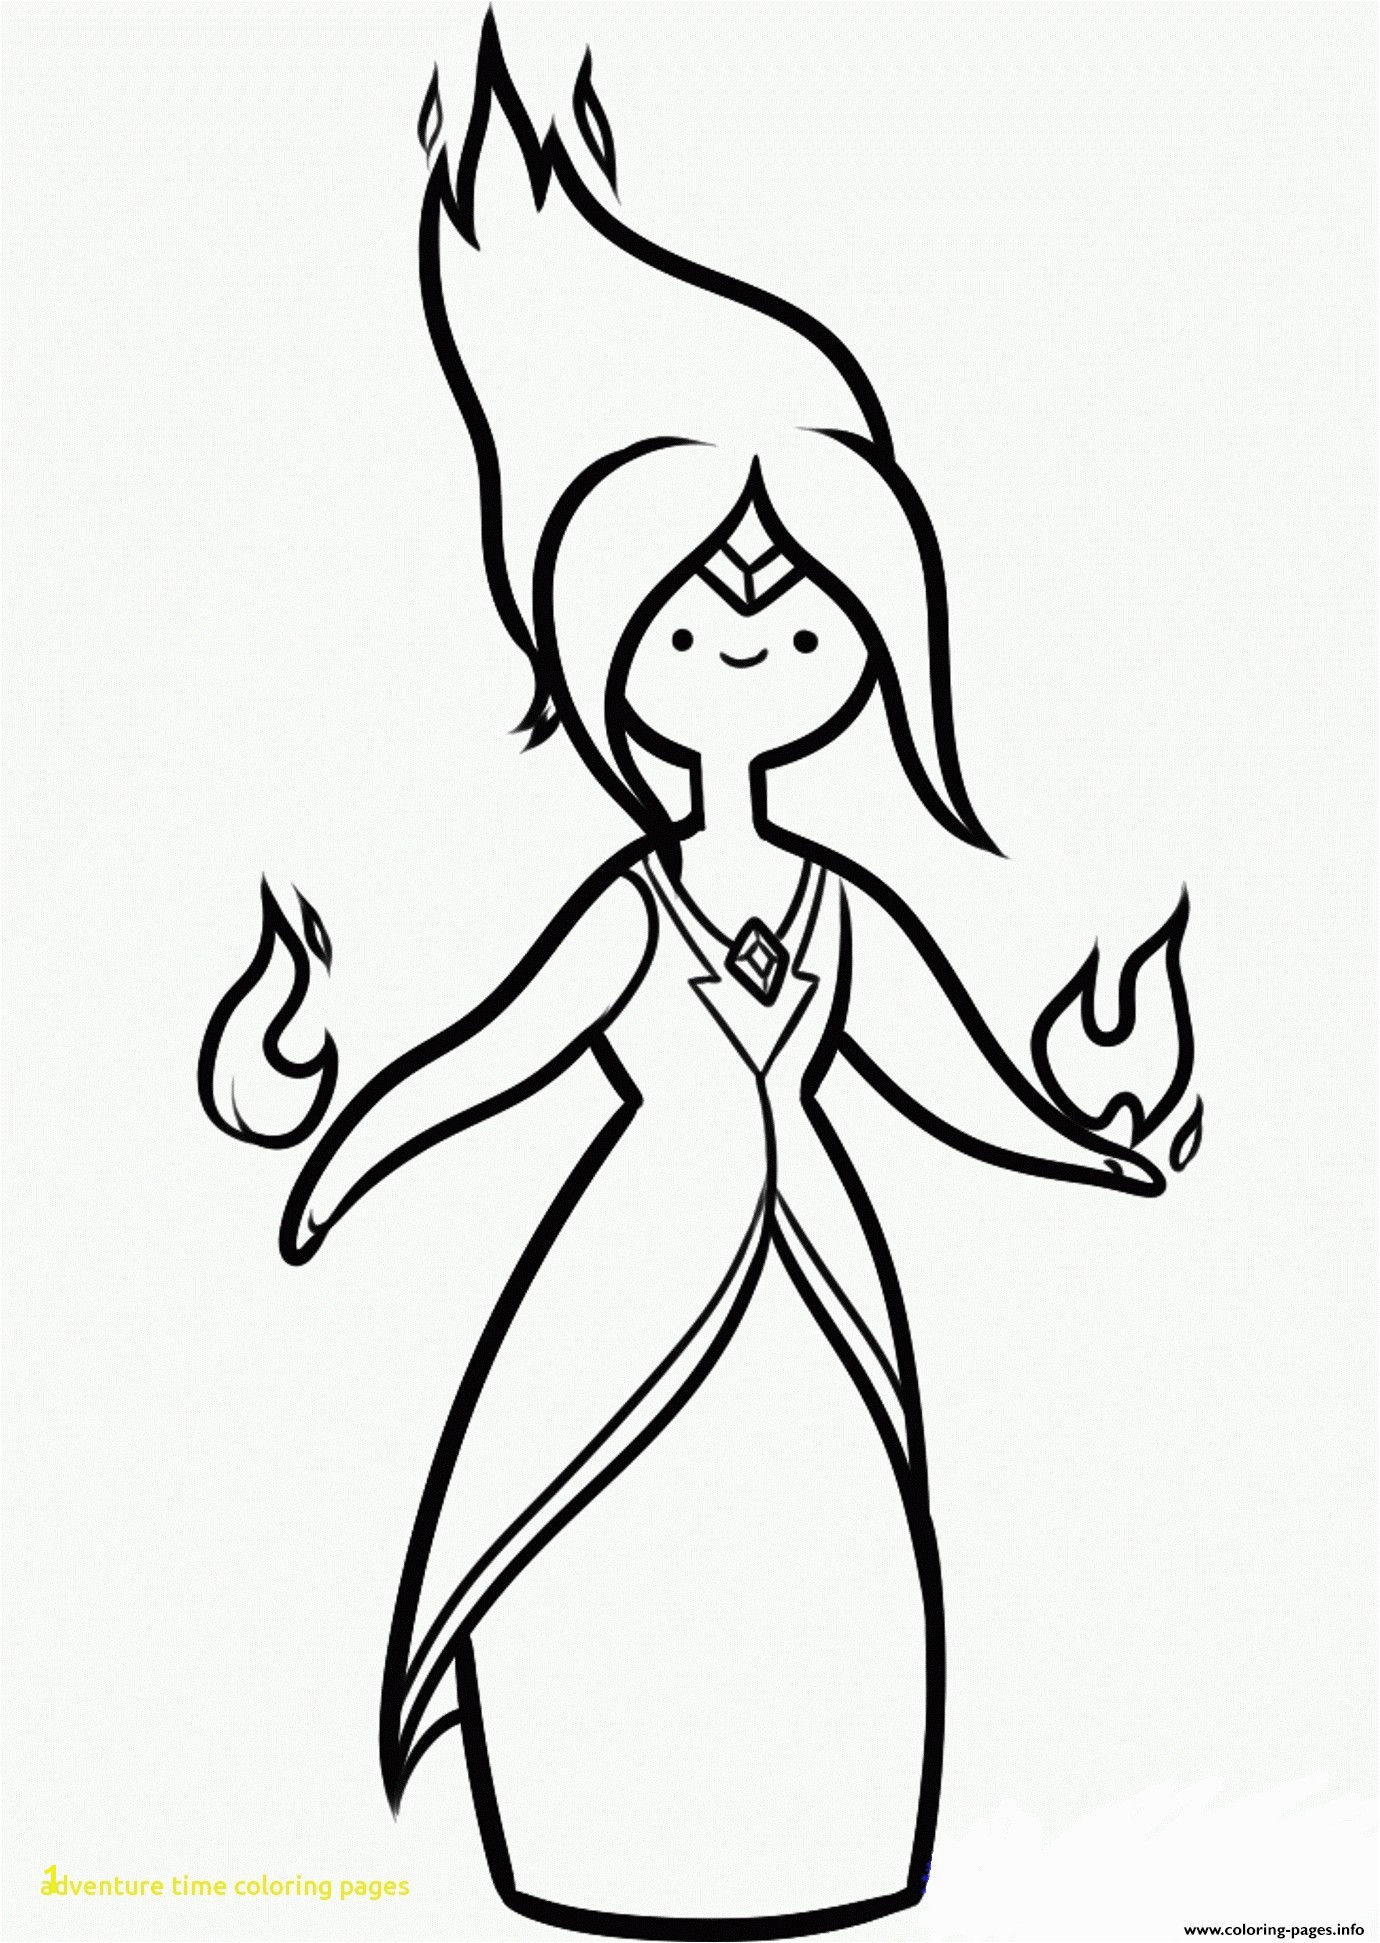 Adventure Time Coloring Pages With Princess Flame Adventure Time S6f46 Coloring Pages Printable